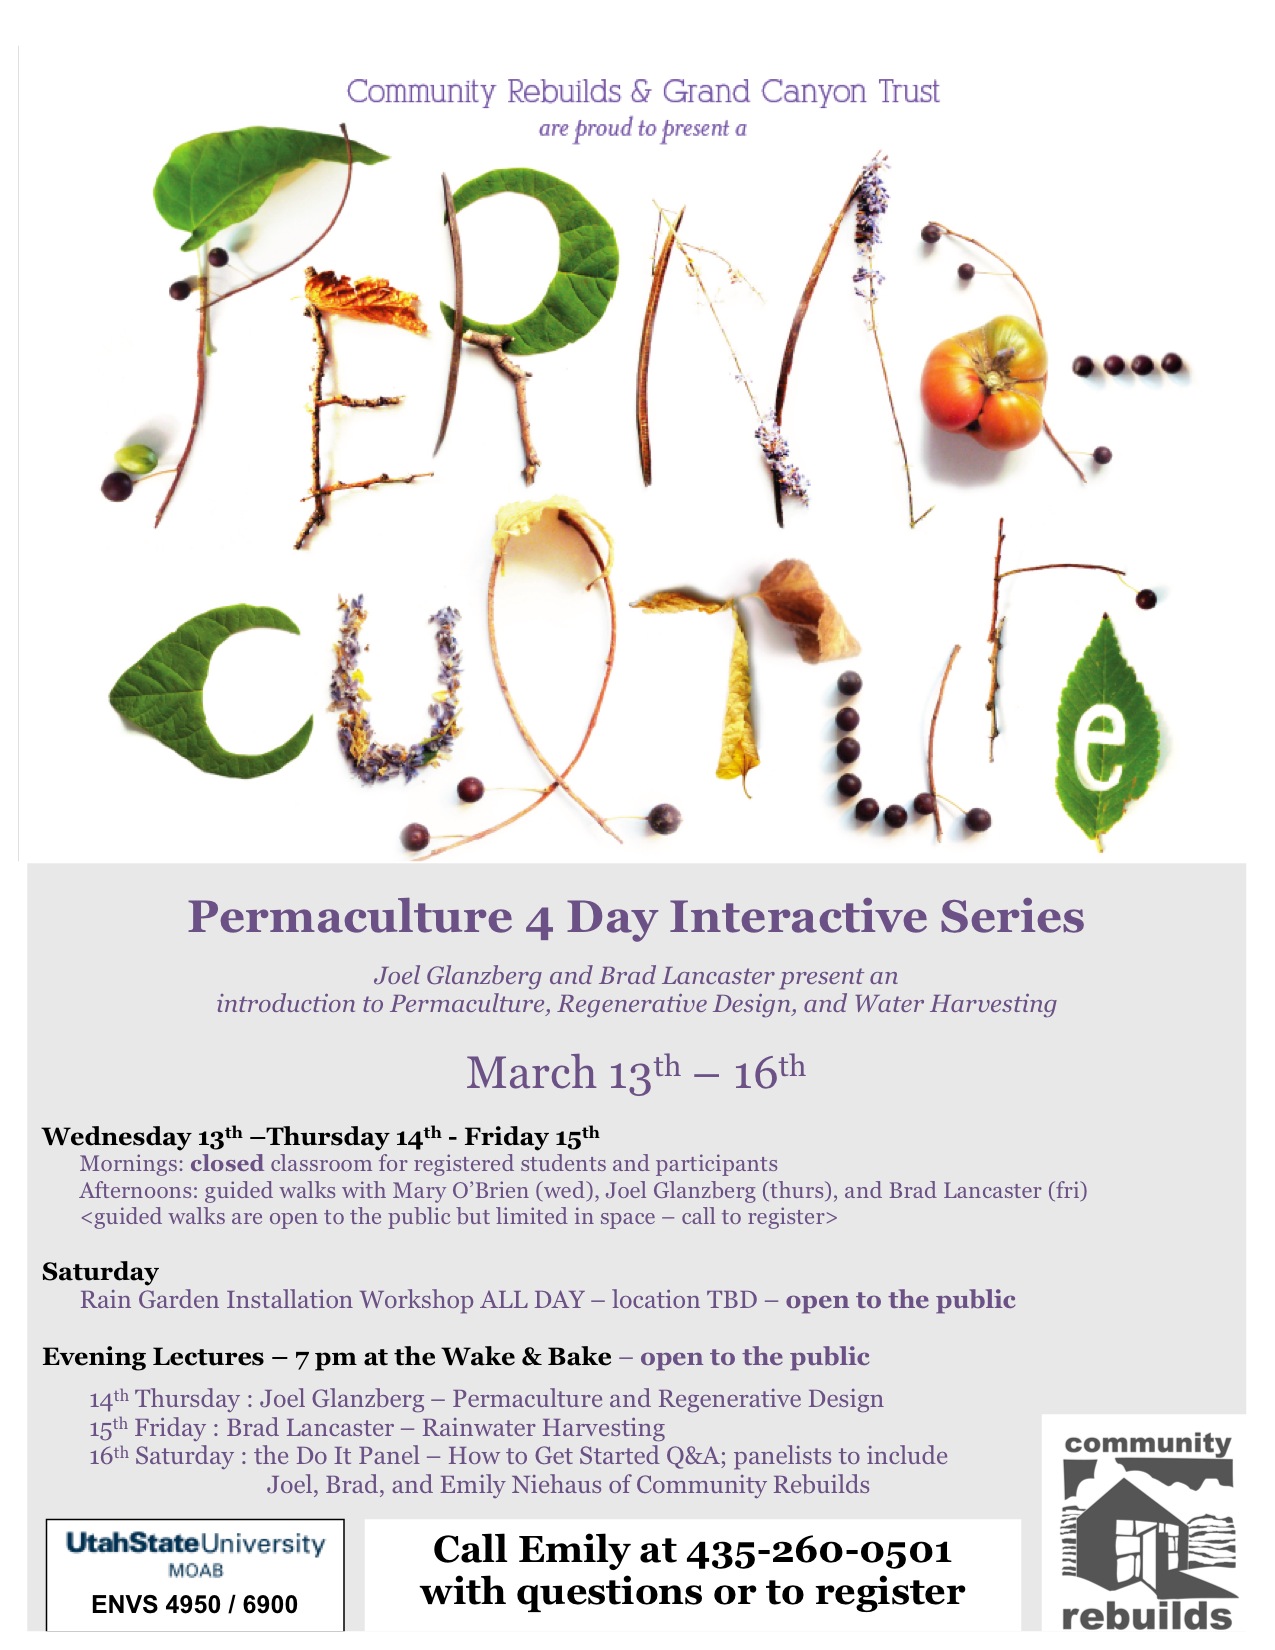 Community Rebuilds spring permaculture series flyer